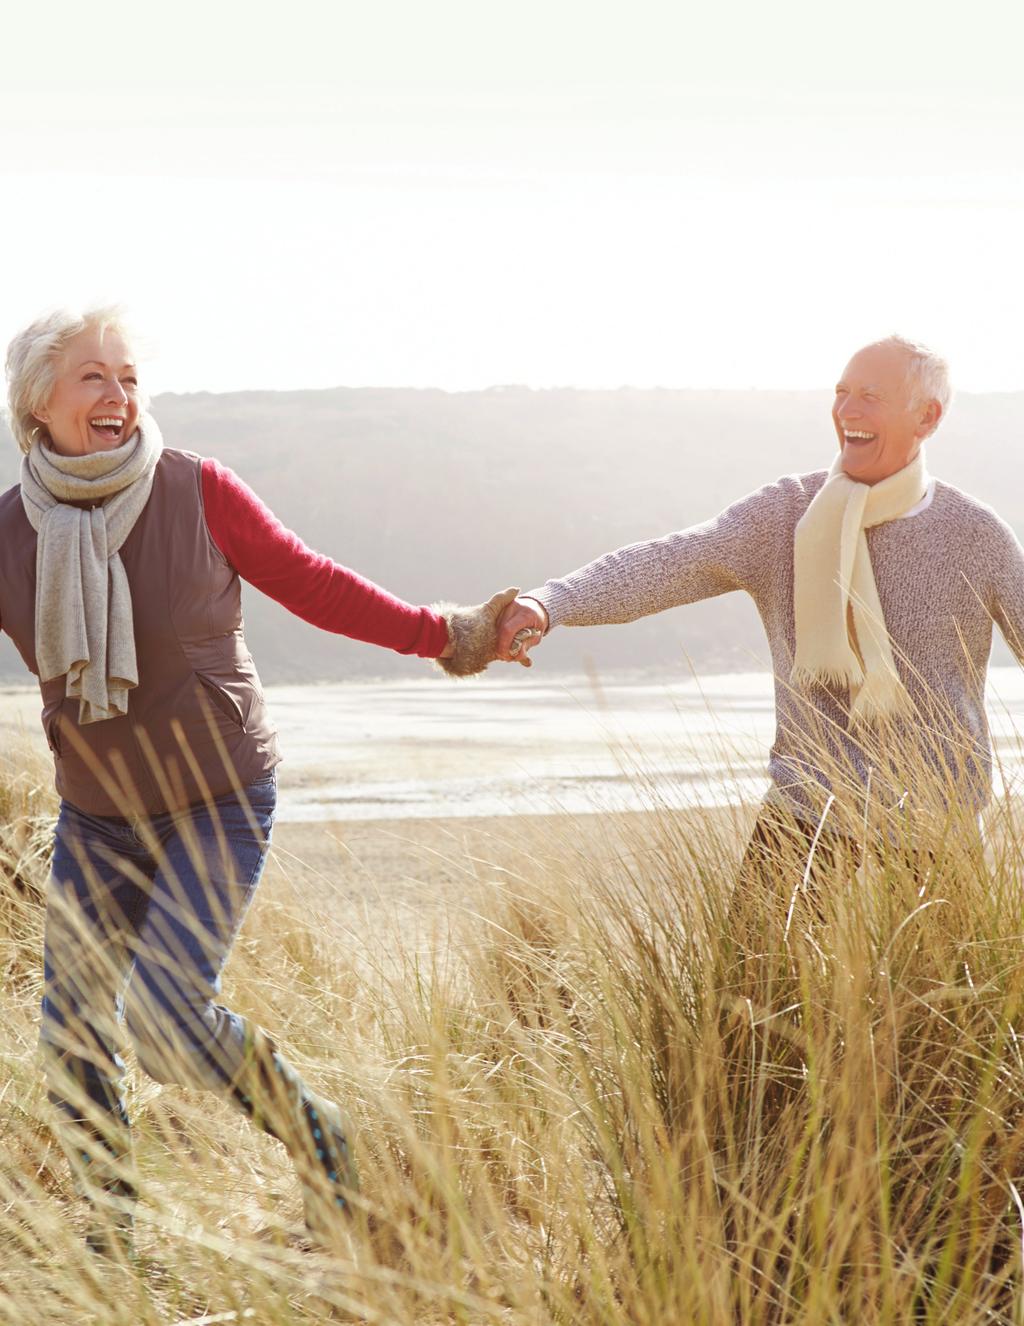 Start your journey If you re age 90 or younger, you can purchase the American Pathway Fixed 5 or Fixed 7 annuities with a minimum single premium (payment) of $5,000 if you use after-tax